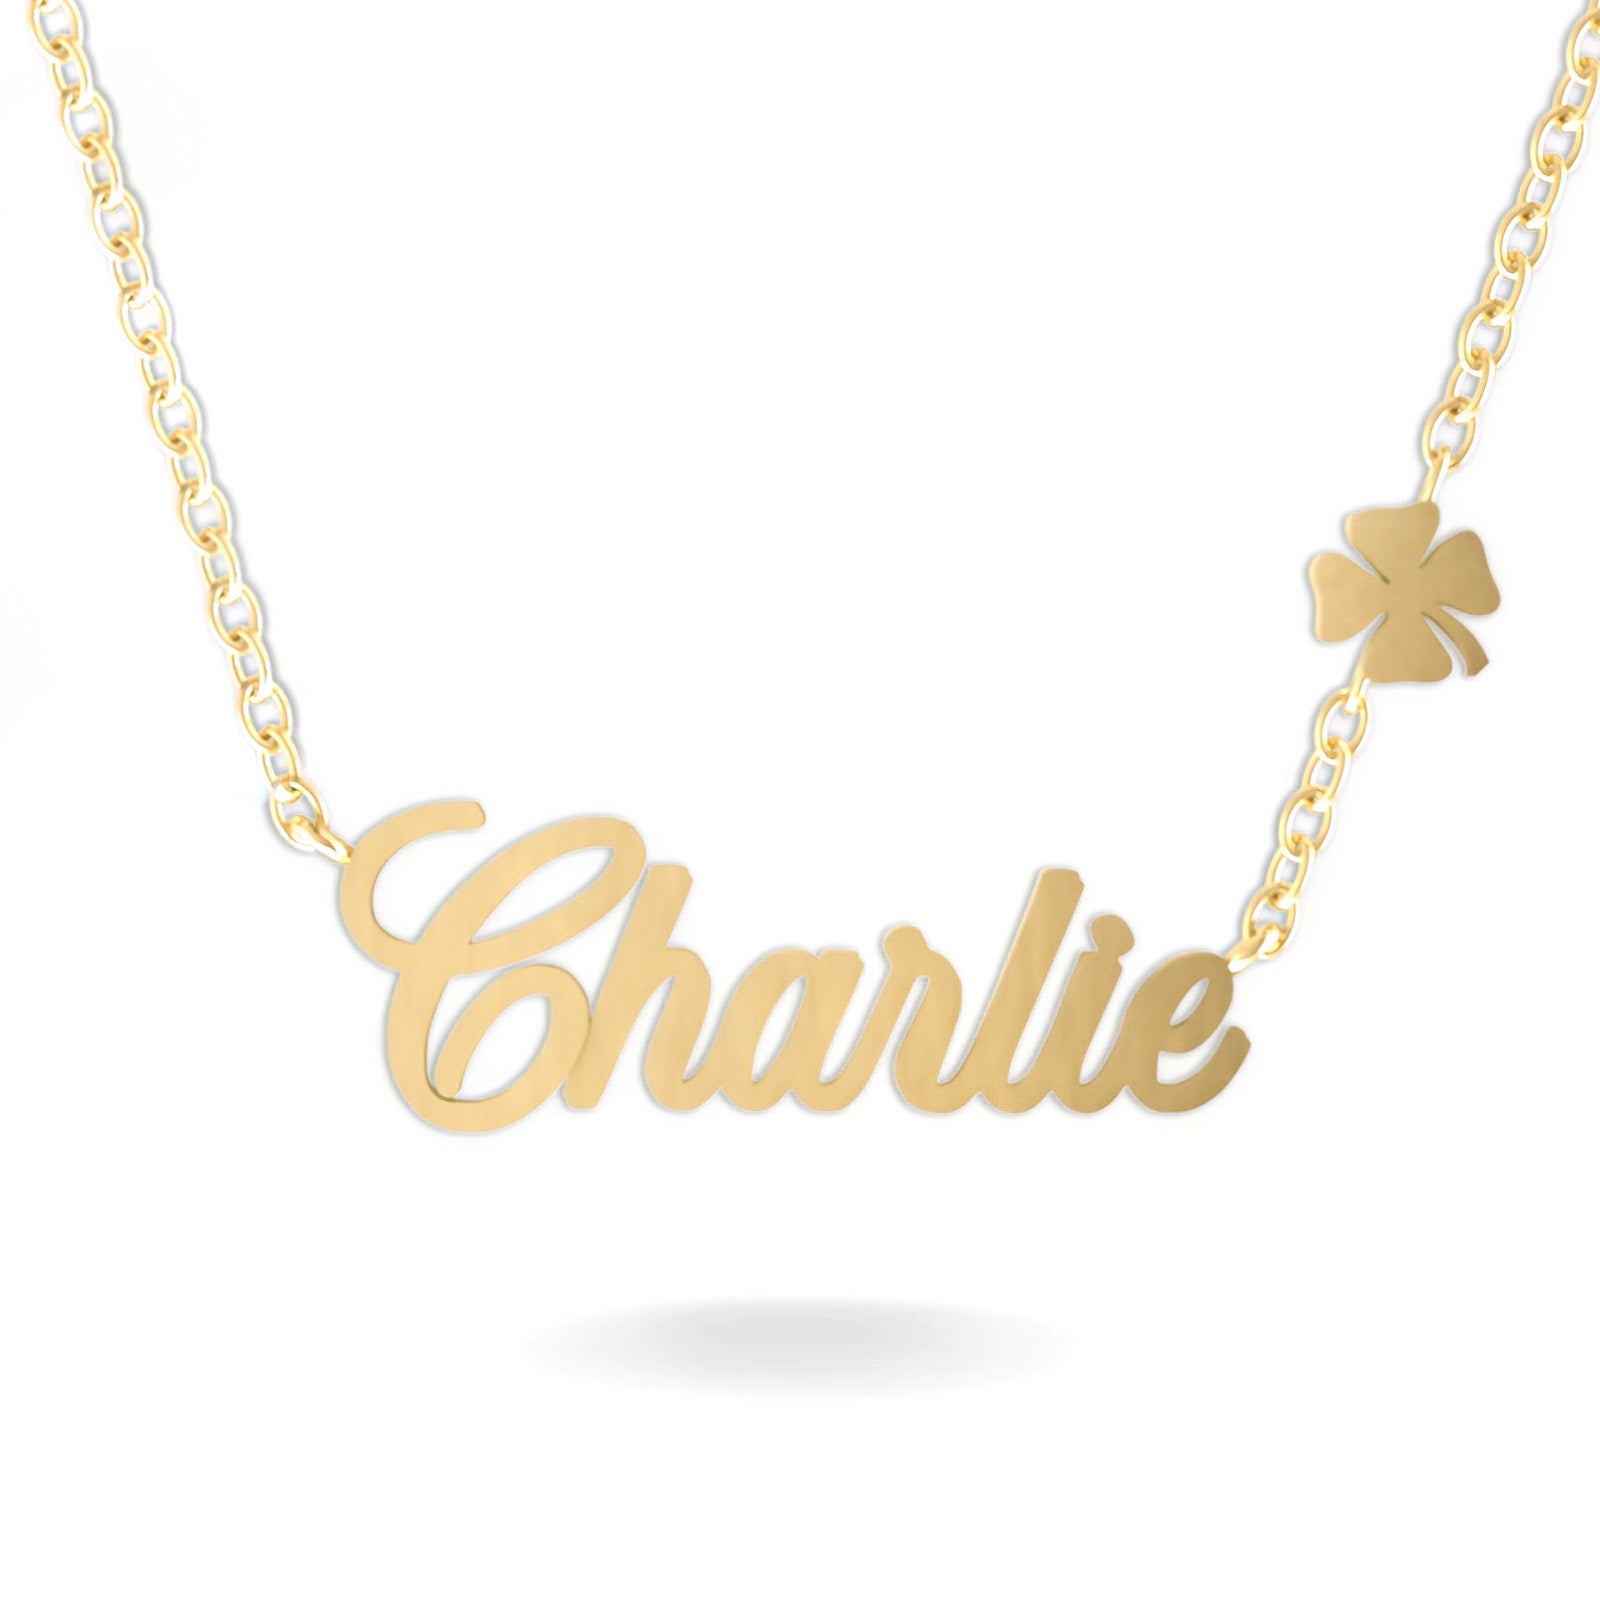 14K YELLOW GOLD LUCKY ME SCRIPT FLOATING NAME NECKLACE